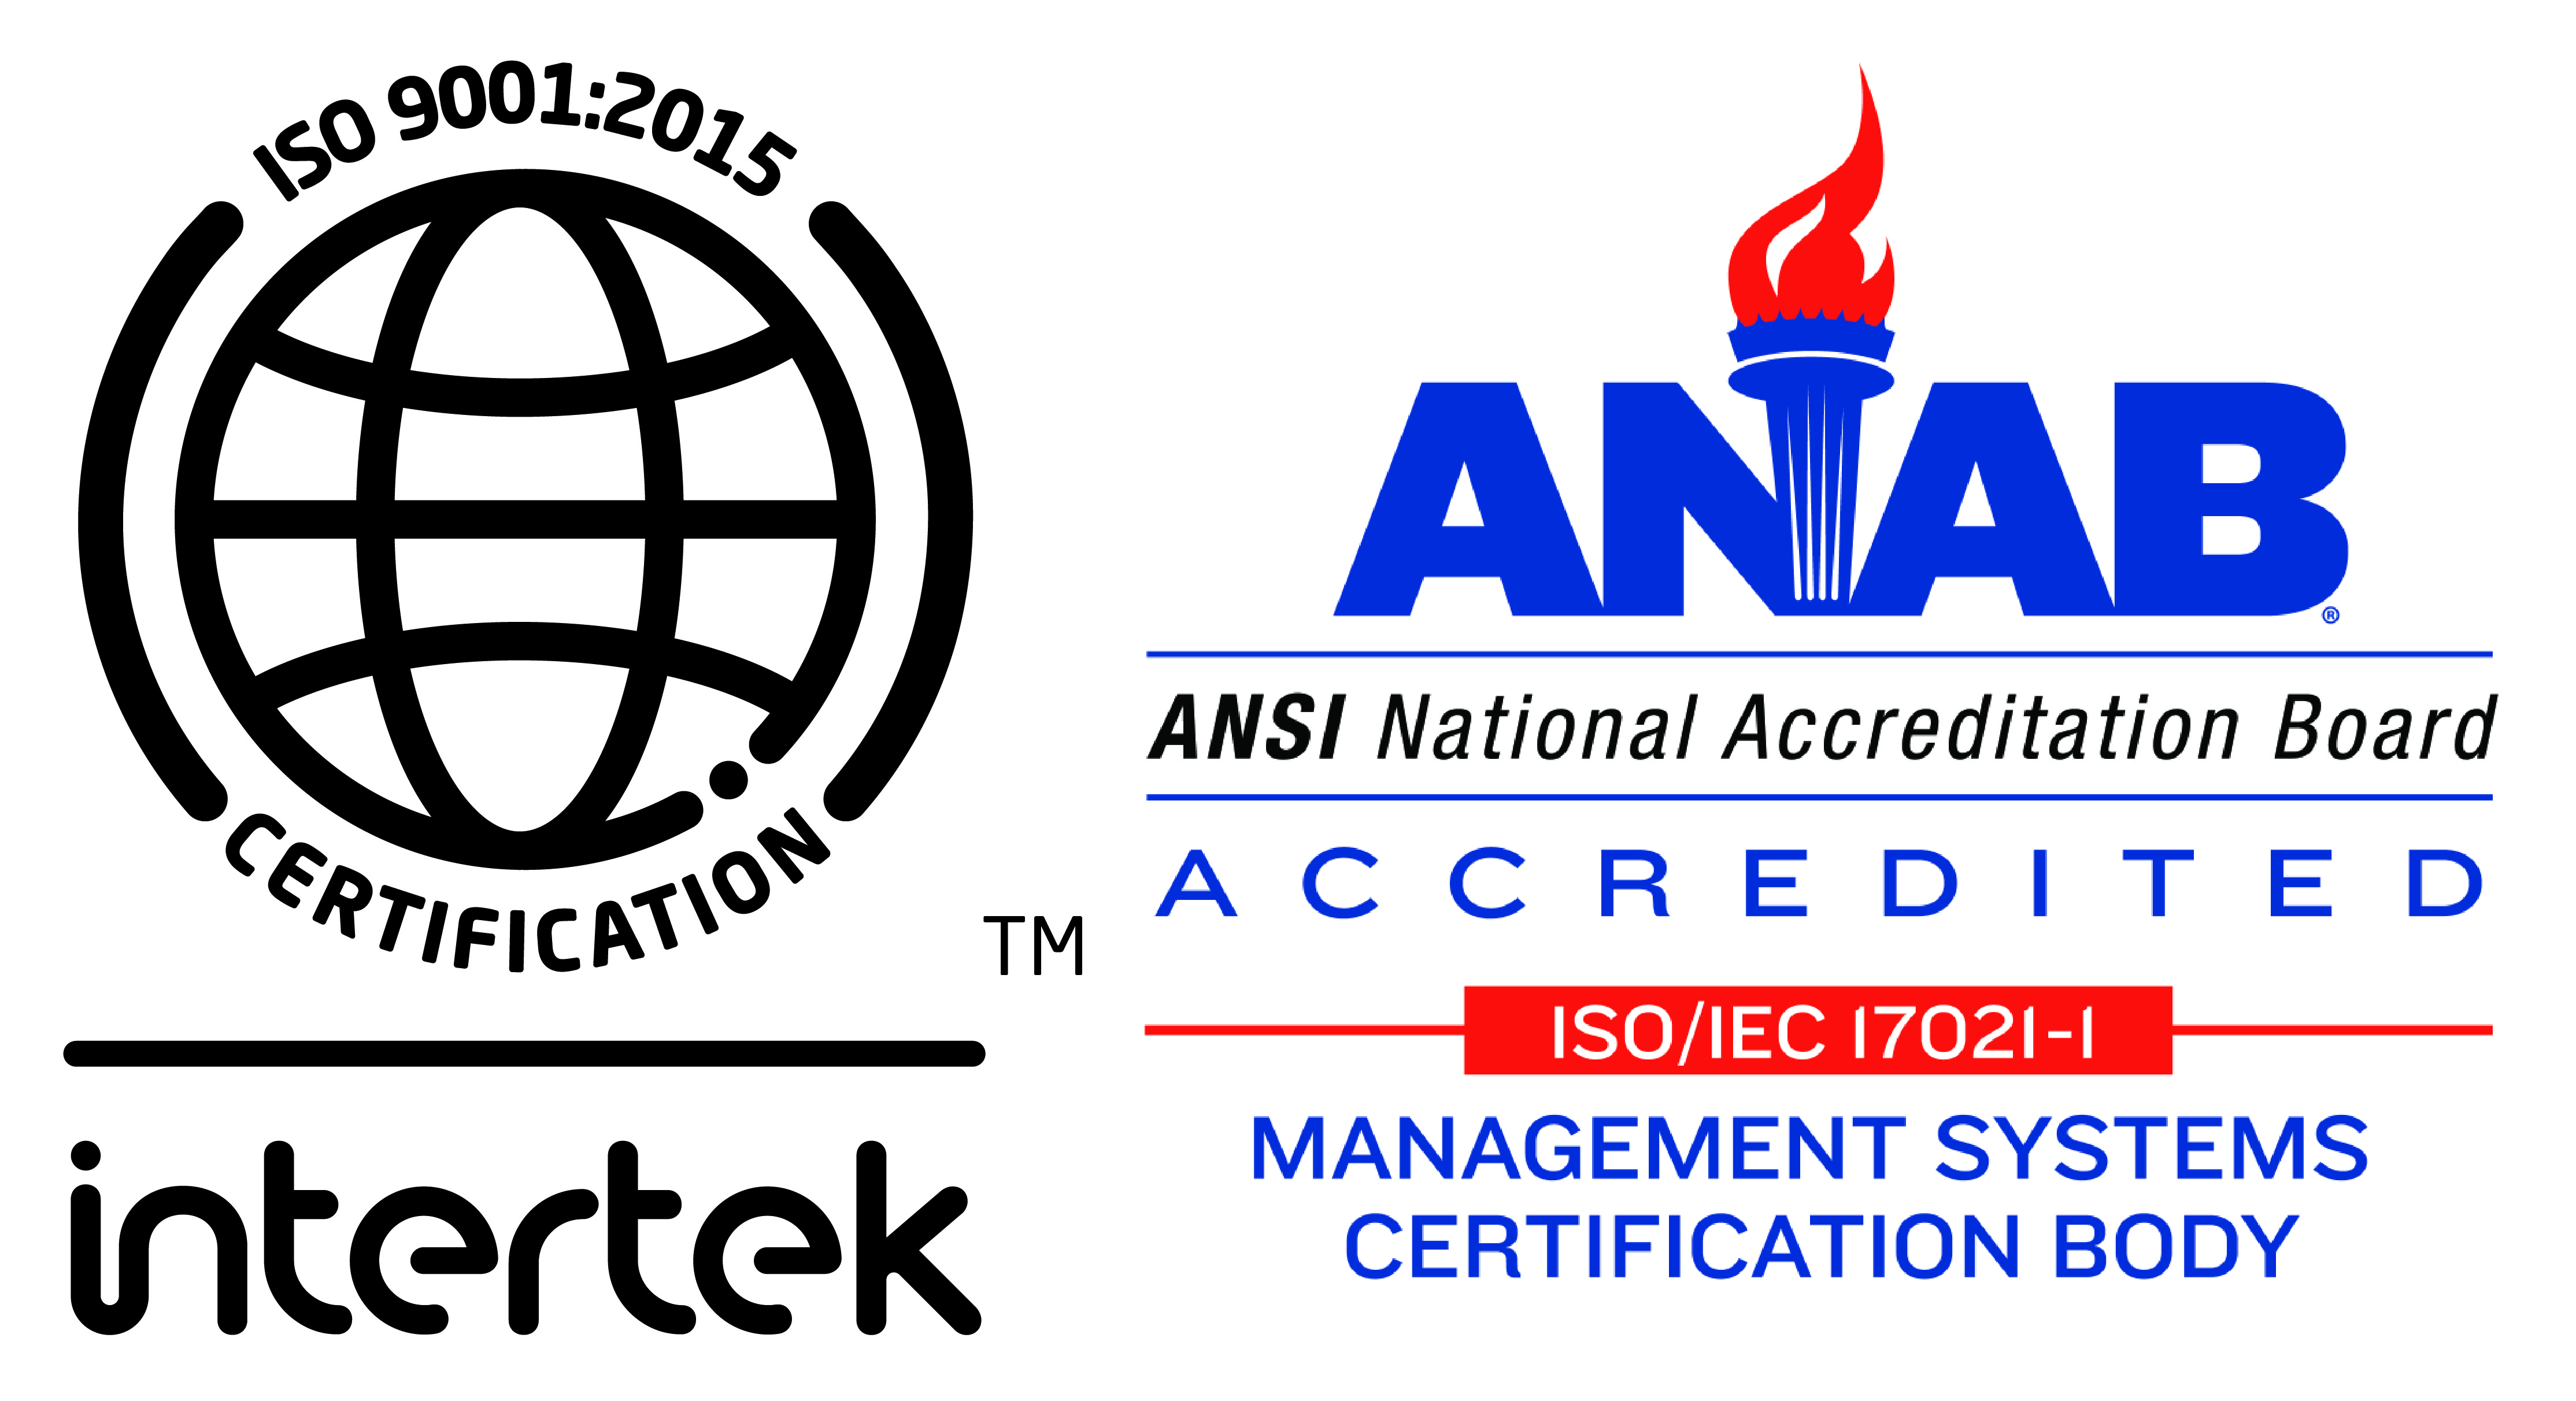 SAI Global Standards Mark and a link to the C2C Certificate of Registration